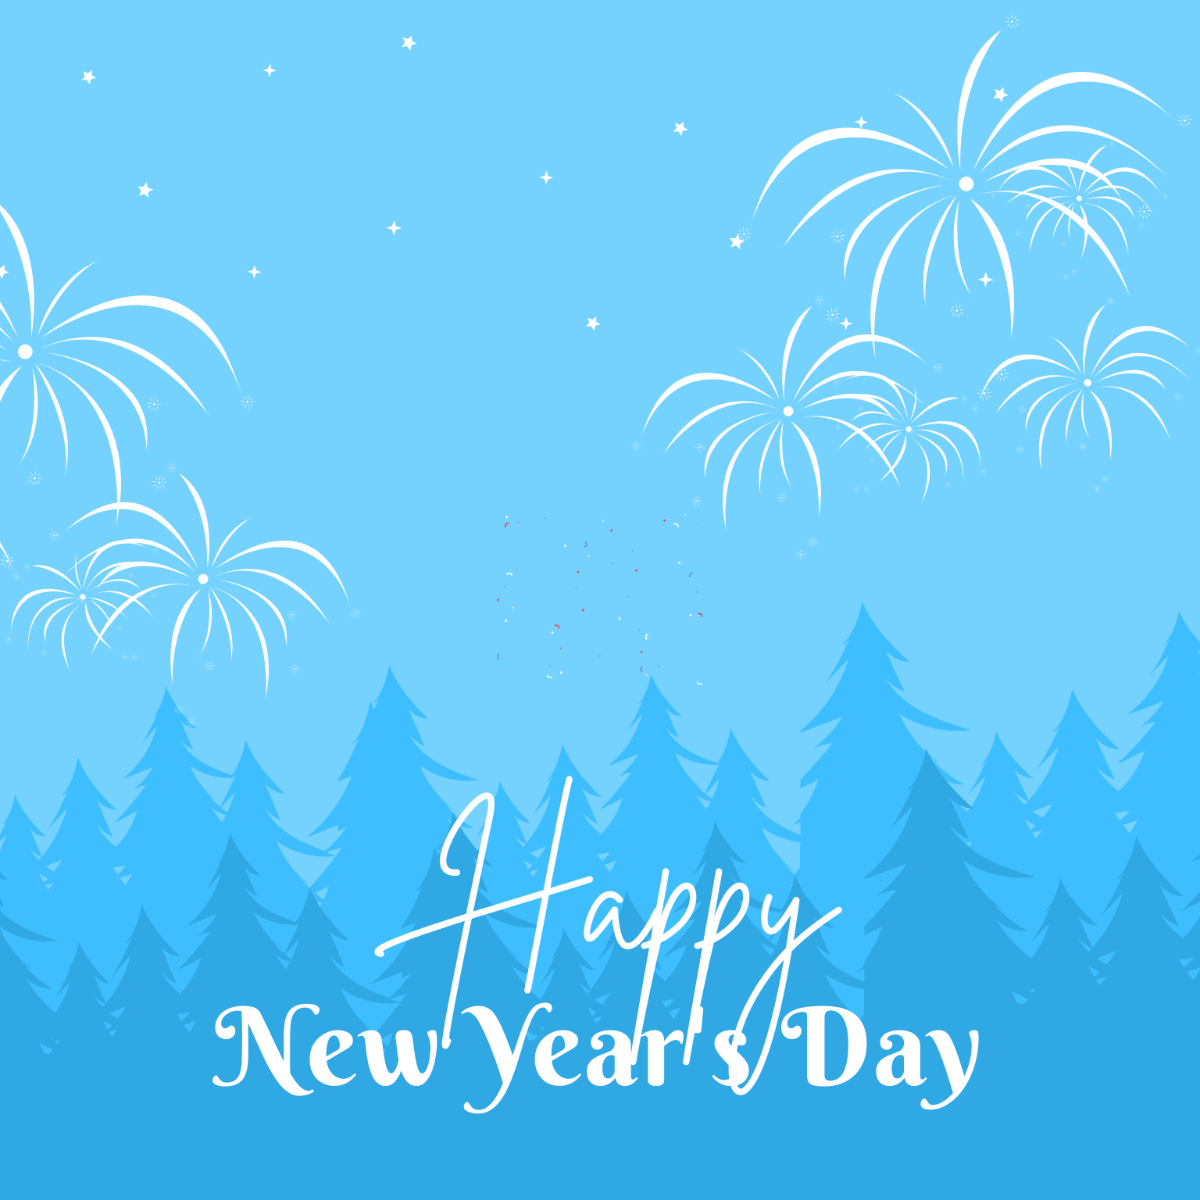 Happy New Year's Day Illustration Template